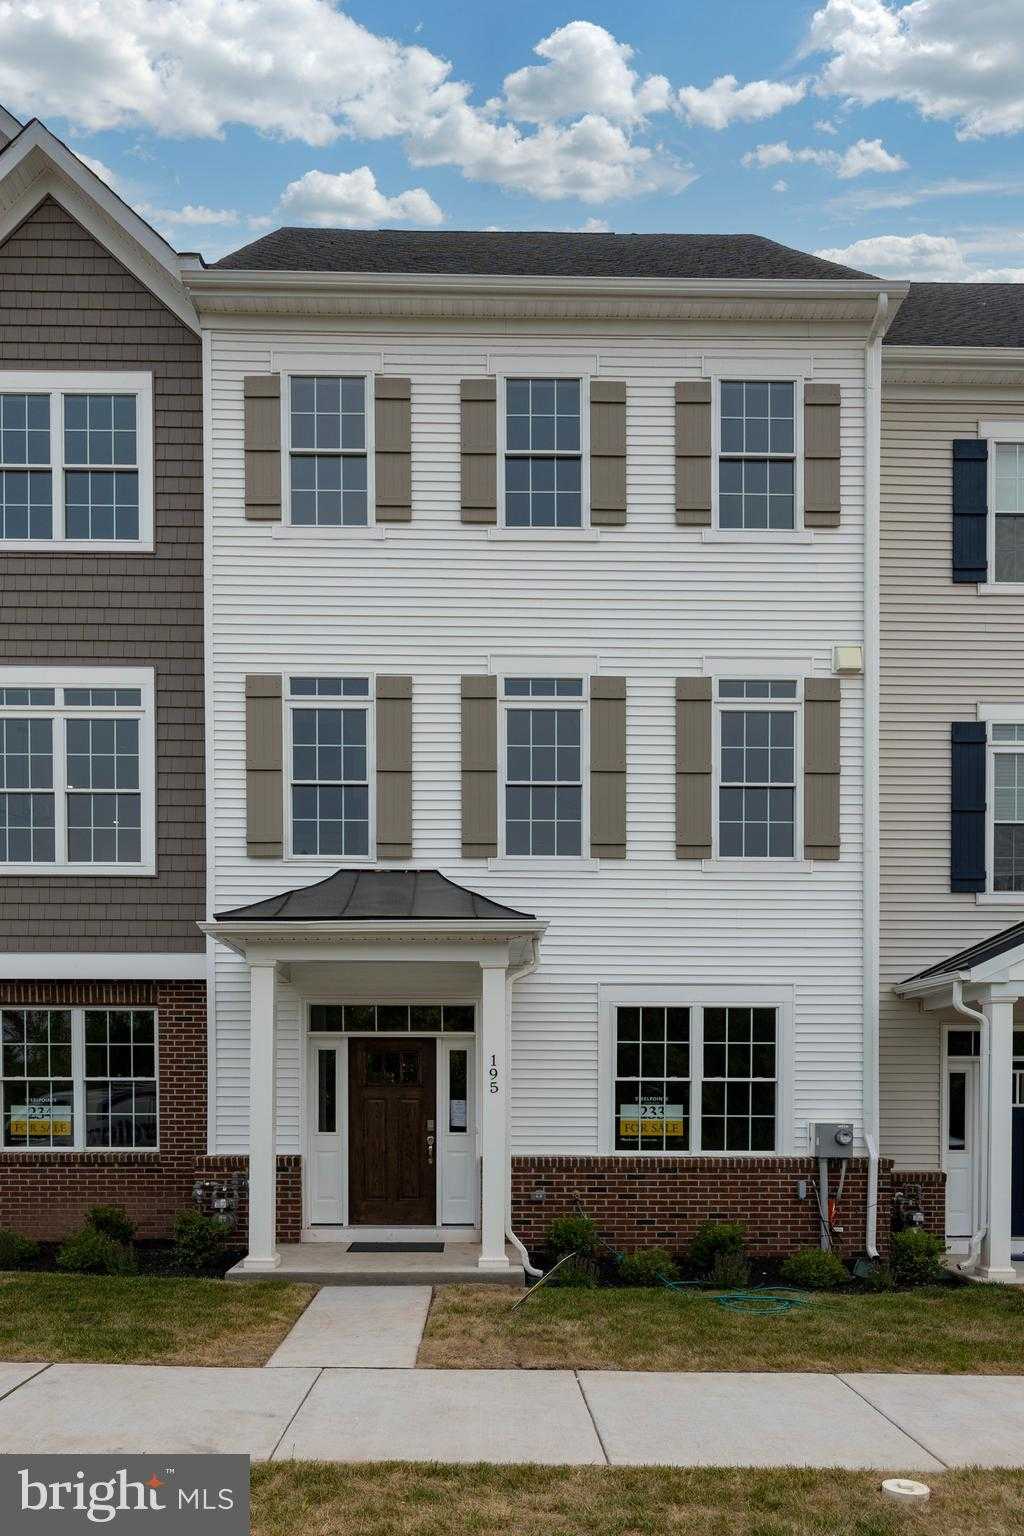 View PHOENIXVILLE, PA 19460 townhome